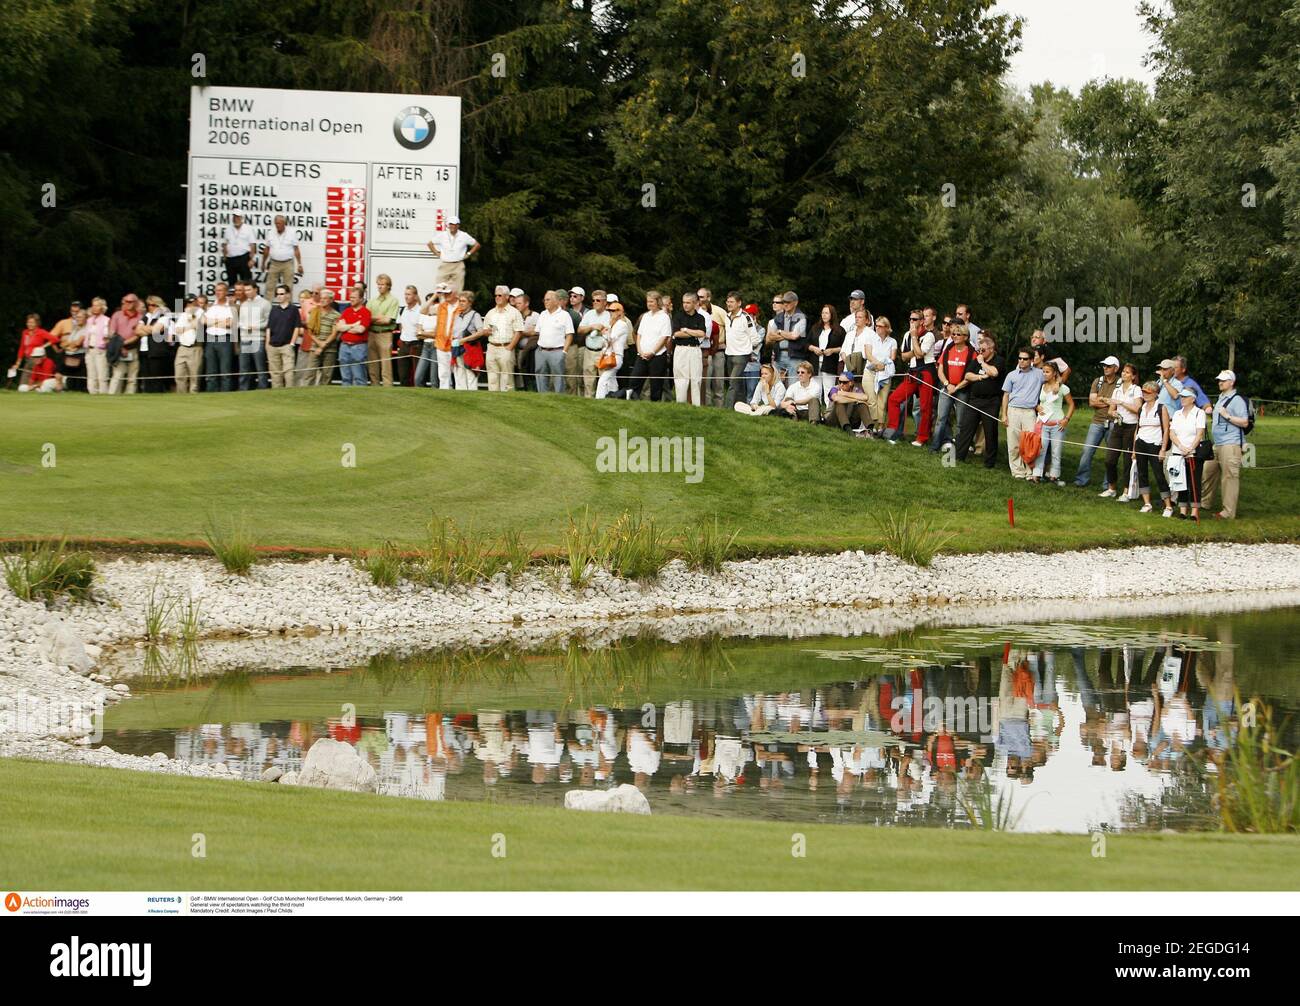 Golf - BMW International Open - Golf Club Munchen Nord Eichenried, Munich,  Germany - 2/9/06 General view of spectators watching the third round  Mandatory Credit: Action Images / Paul Childs Stock Photo - Alamy